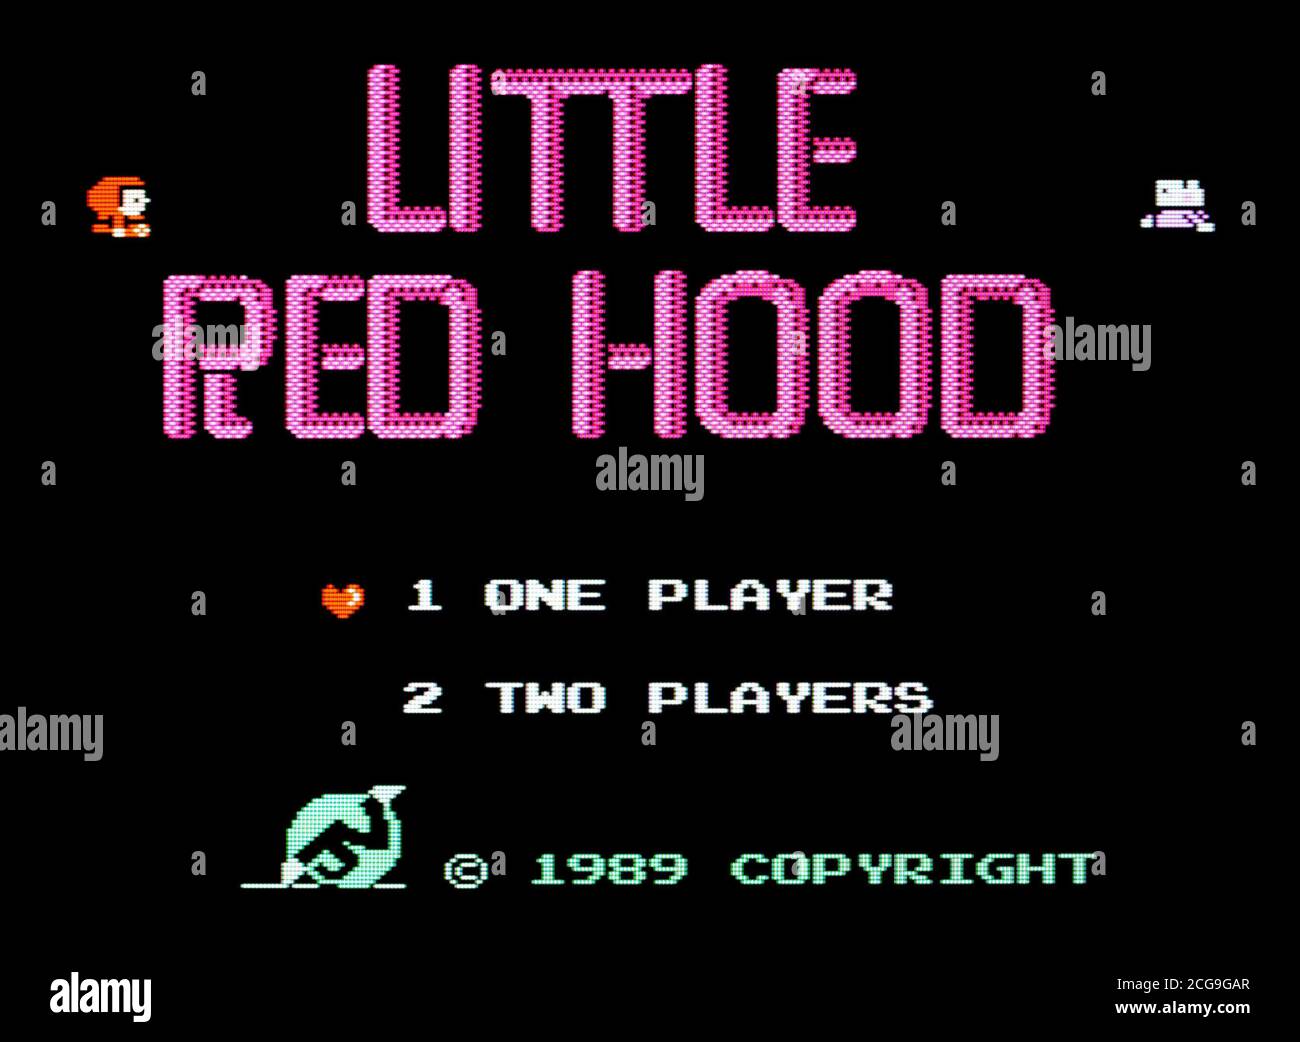 Little Red Hood Nintendo Entertainment System Nes Videogame Editorial Use Only Stock Photo Alamy